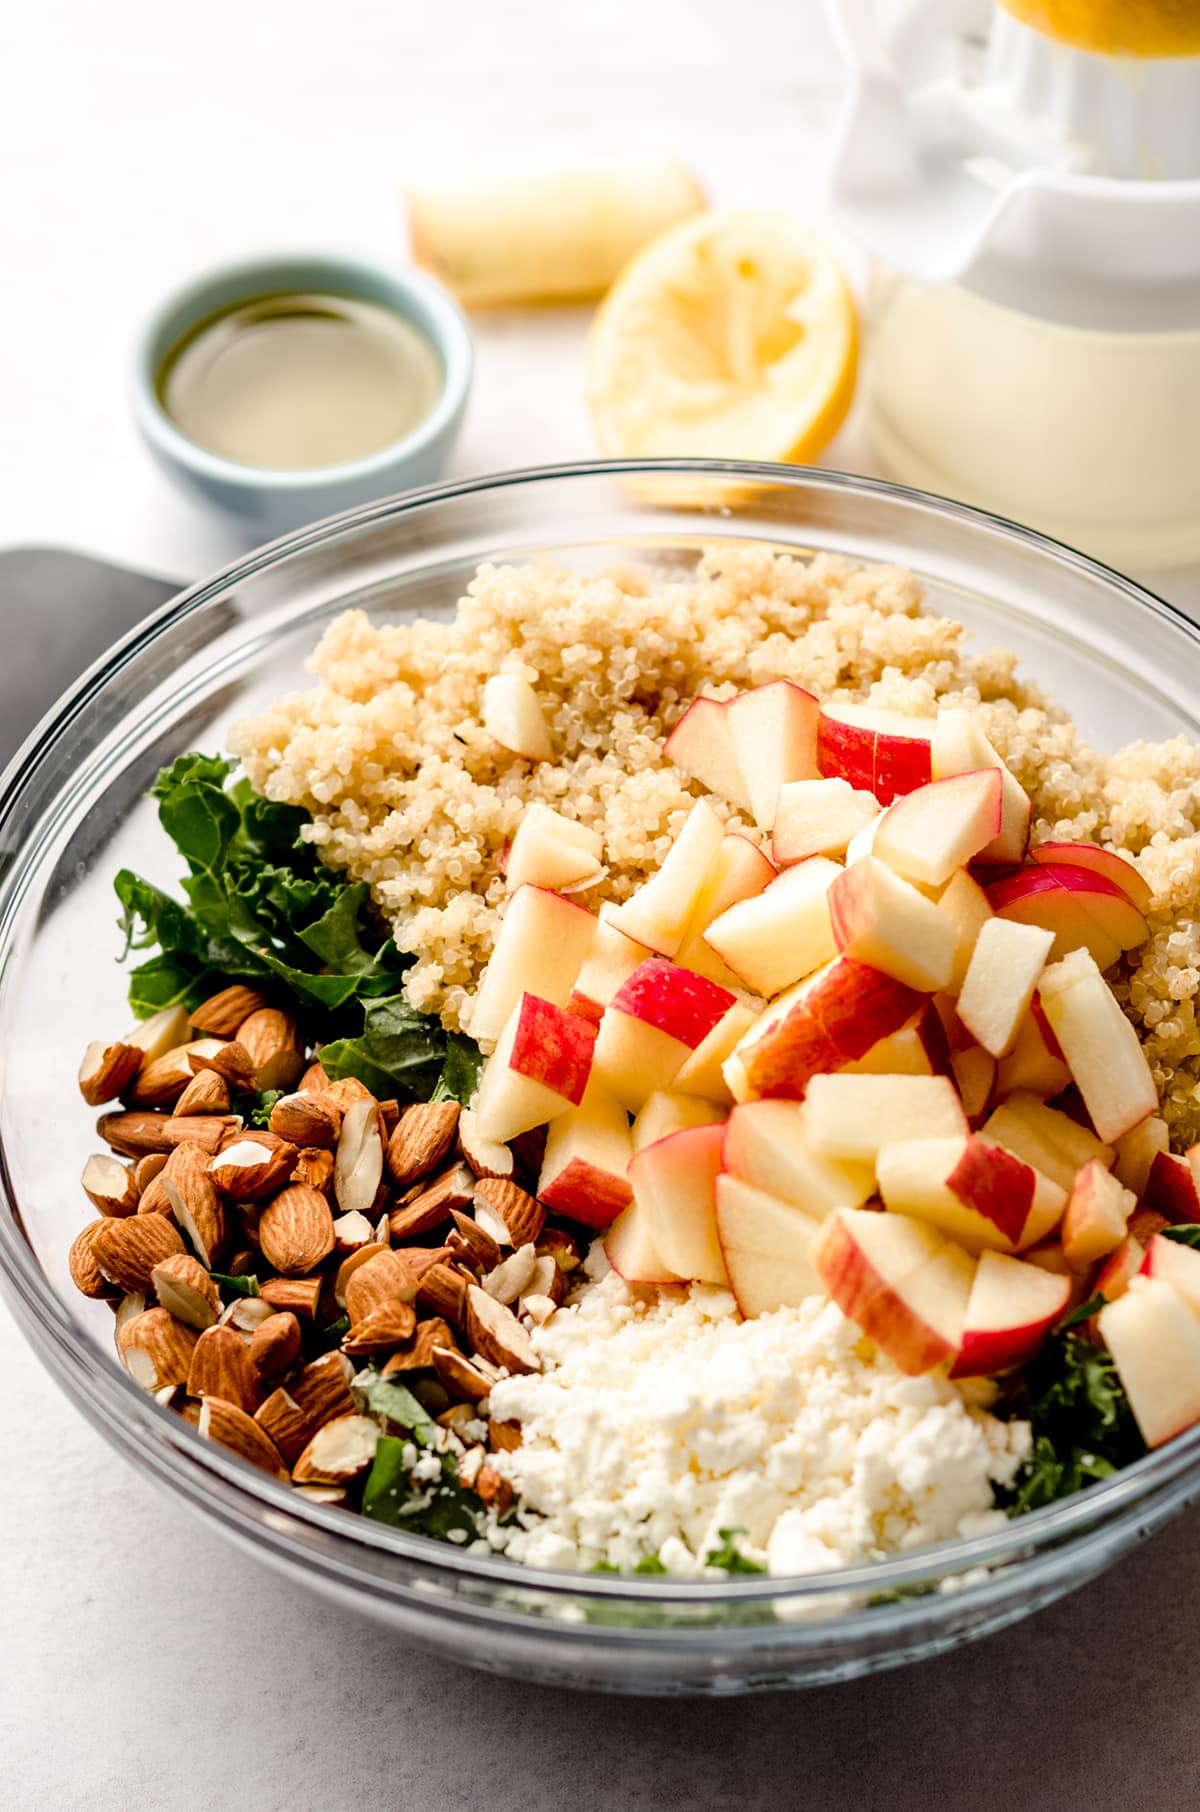 ingredients for apple, quinoa, and almond kale salad in a bowl